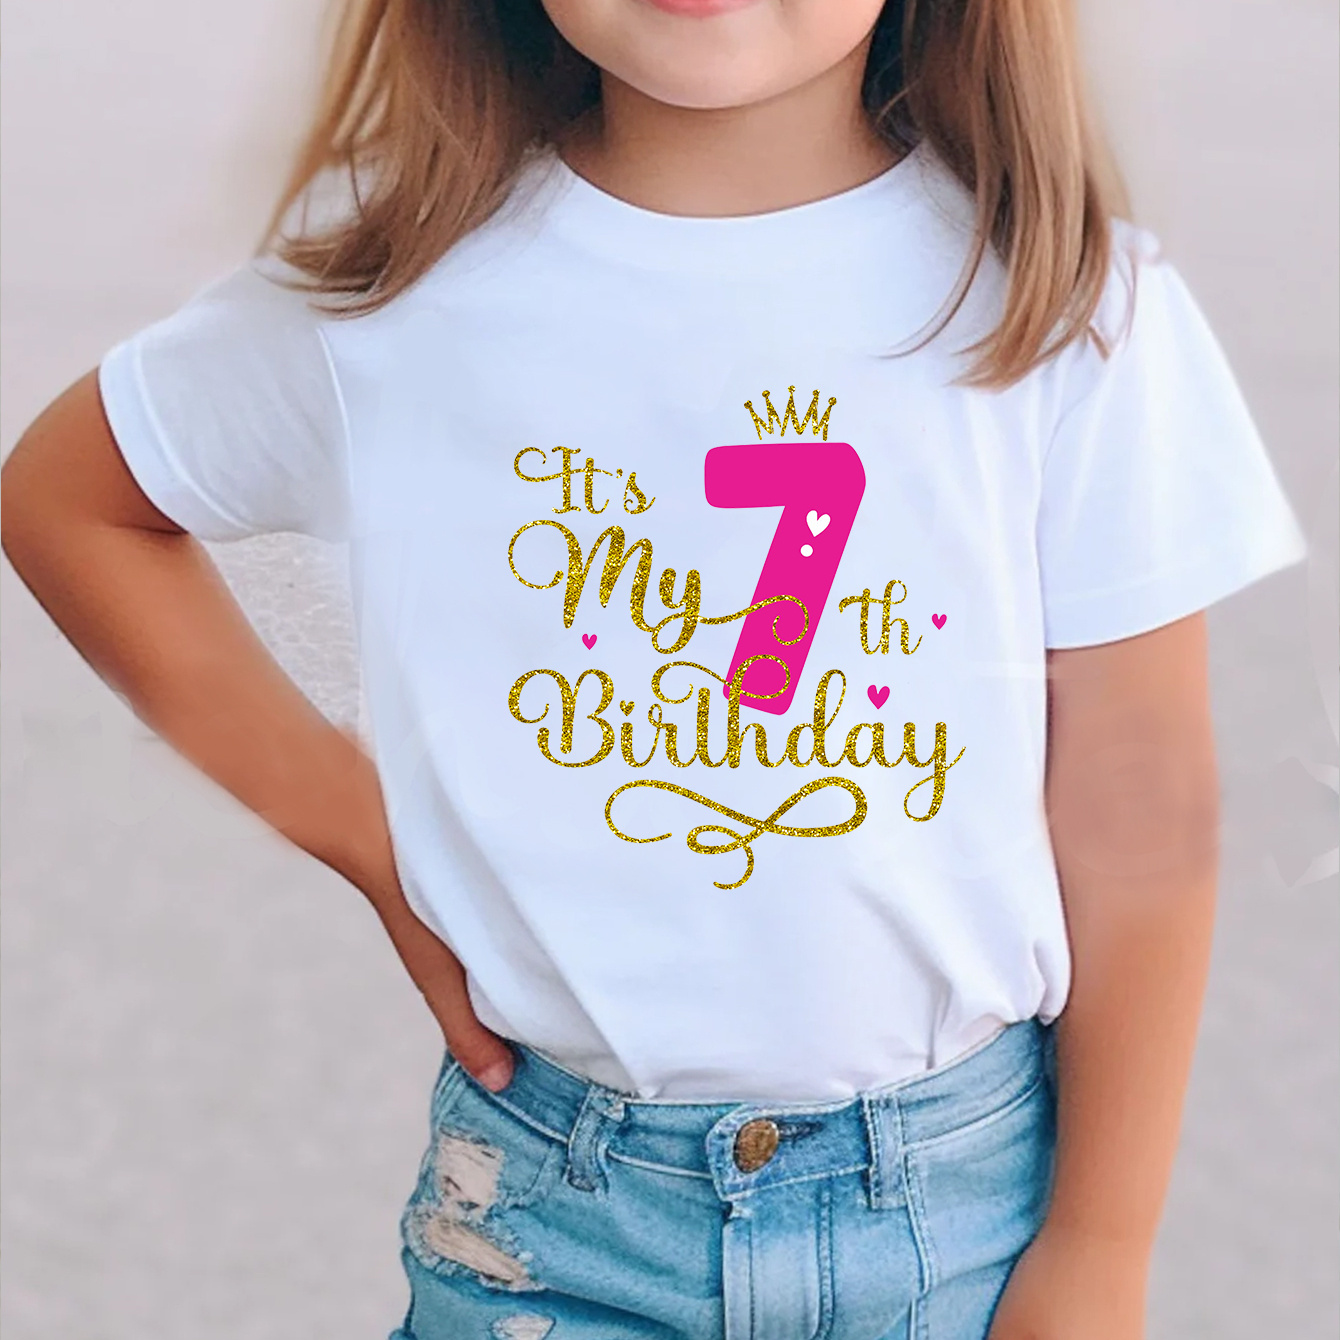 

It's My 7th Birthday Print Tee, Girls' Casual & Trendy Crew Neck Short Sleeve Cotton T-shirt For Spring & Summer, Girls' Clothes For Outdoor Activities & Birthday